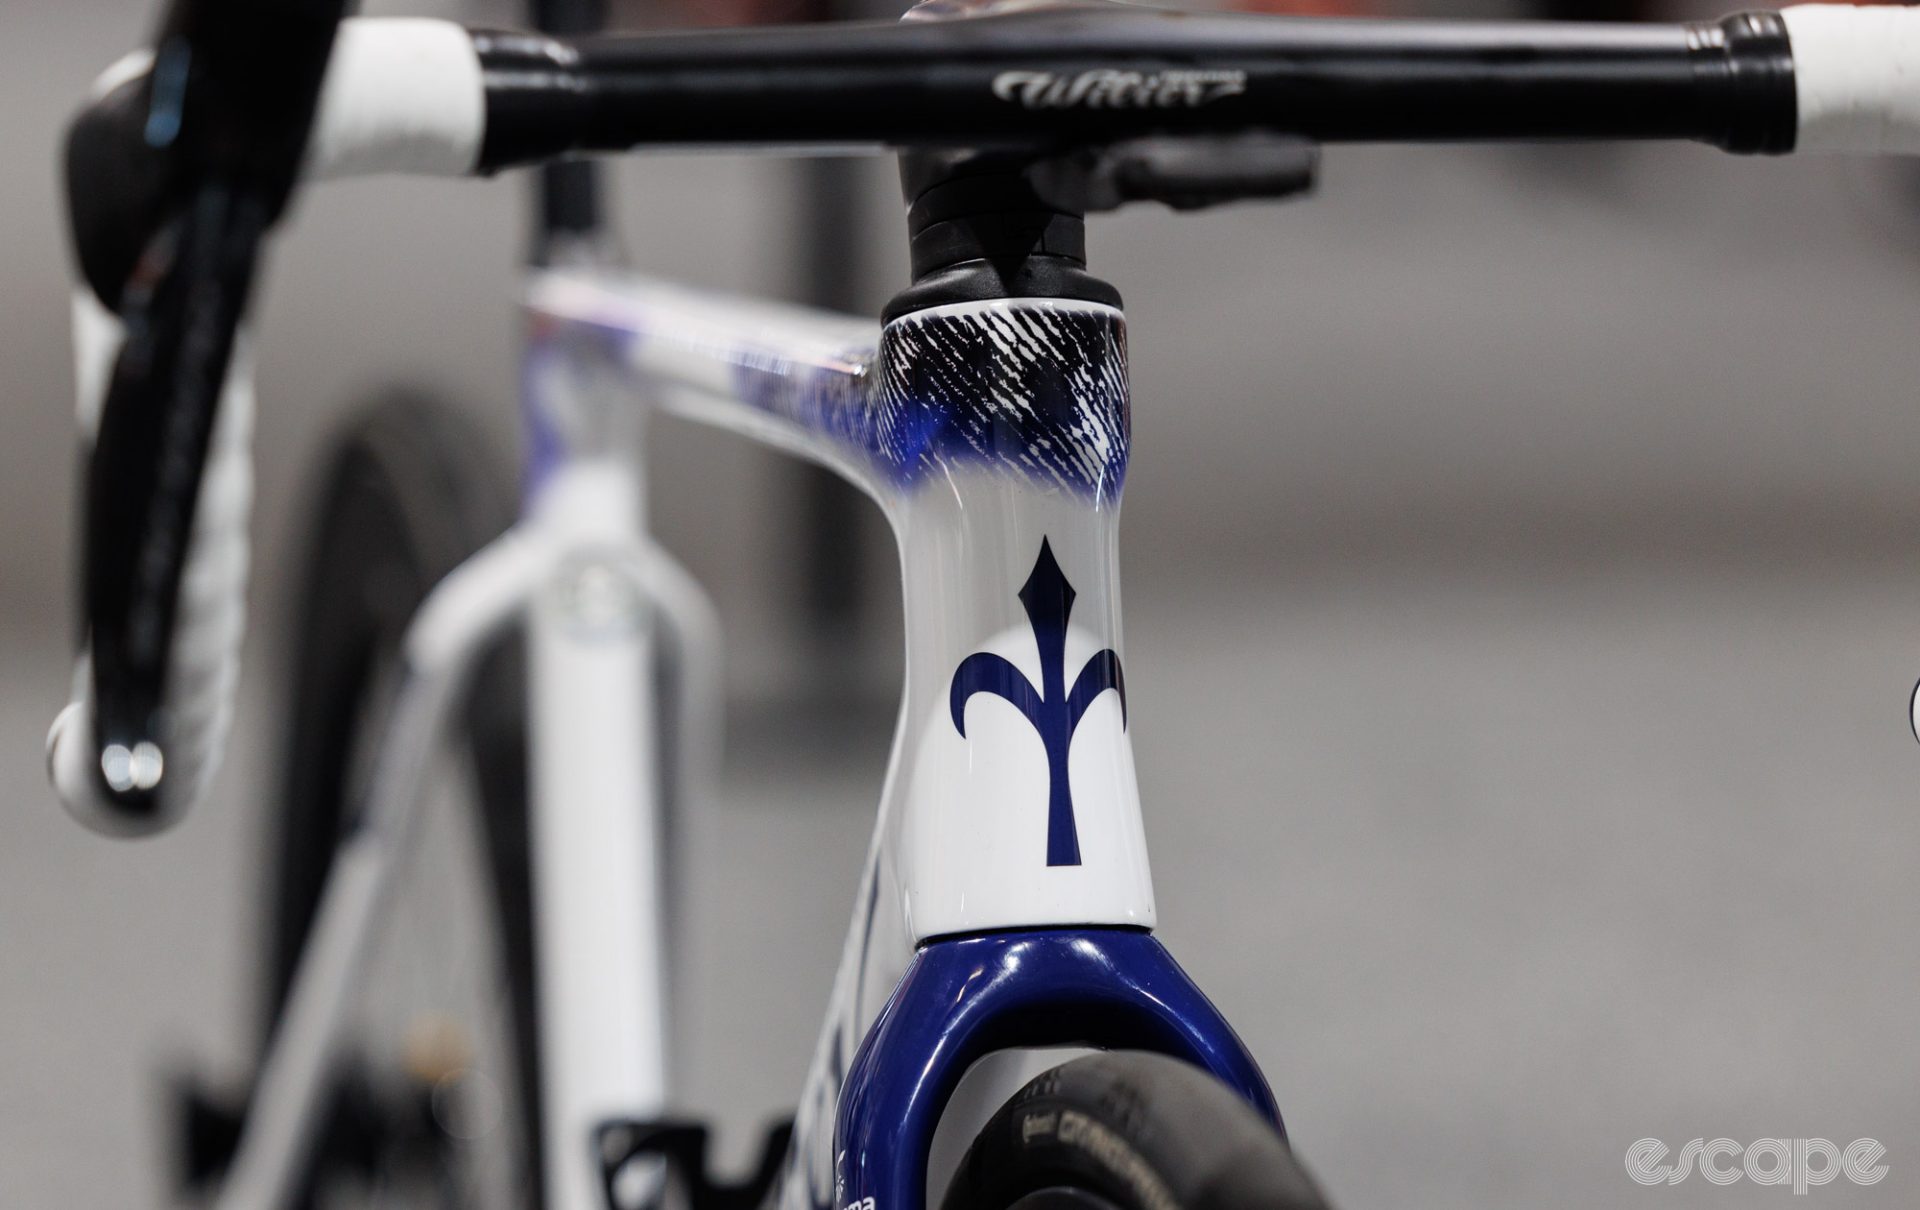 The trident logo on the head tube.